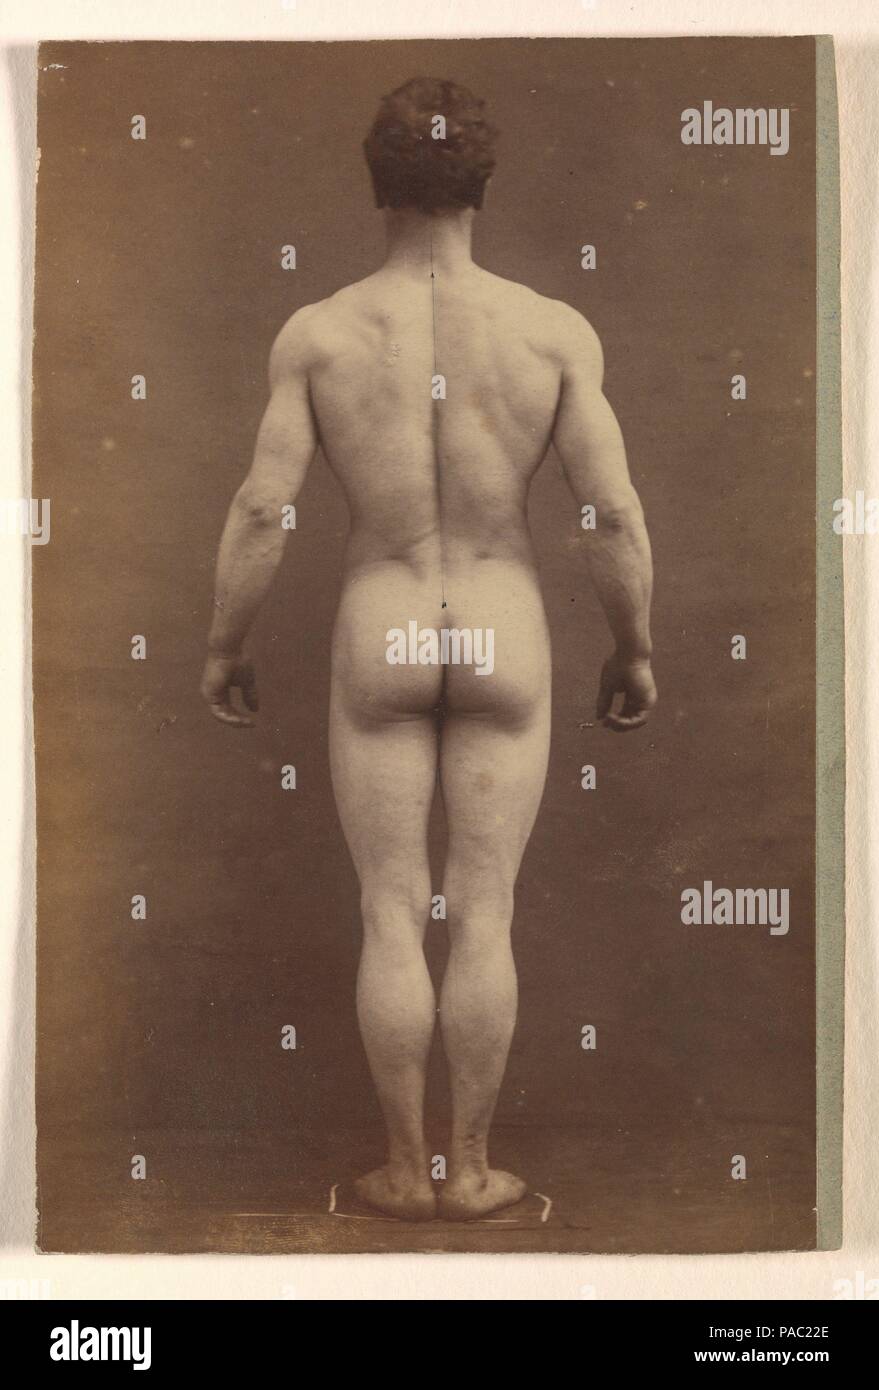 [Male Musculature Study]. Artist: Albert Londe (French, 1858-1917); Paul Marie Louis Pierre Richer (French, 1849-1933). Dimensions: Image: 14.9 x 9.6 cm (5 7/8 x 3 3/4 in.)  Mount: 14.9 x 9.9 cm (5 7/8 x 3 7/8 in.). Date: ca. 1890.  Author of a treatise on the importance of the camera in medical practice, Albert Londe declared, 'the photographic plate is the scientist's true retina.' In collaboration with a laboratory director and professor of anatomy at the École des Beaux-Arts, Londe found that photographs intended for physiological analysis could also serve artistic applications. Their care Stock Photo